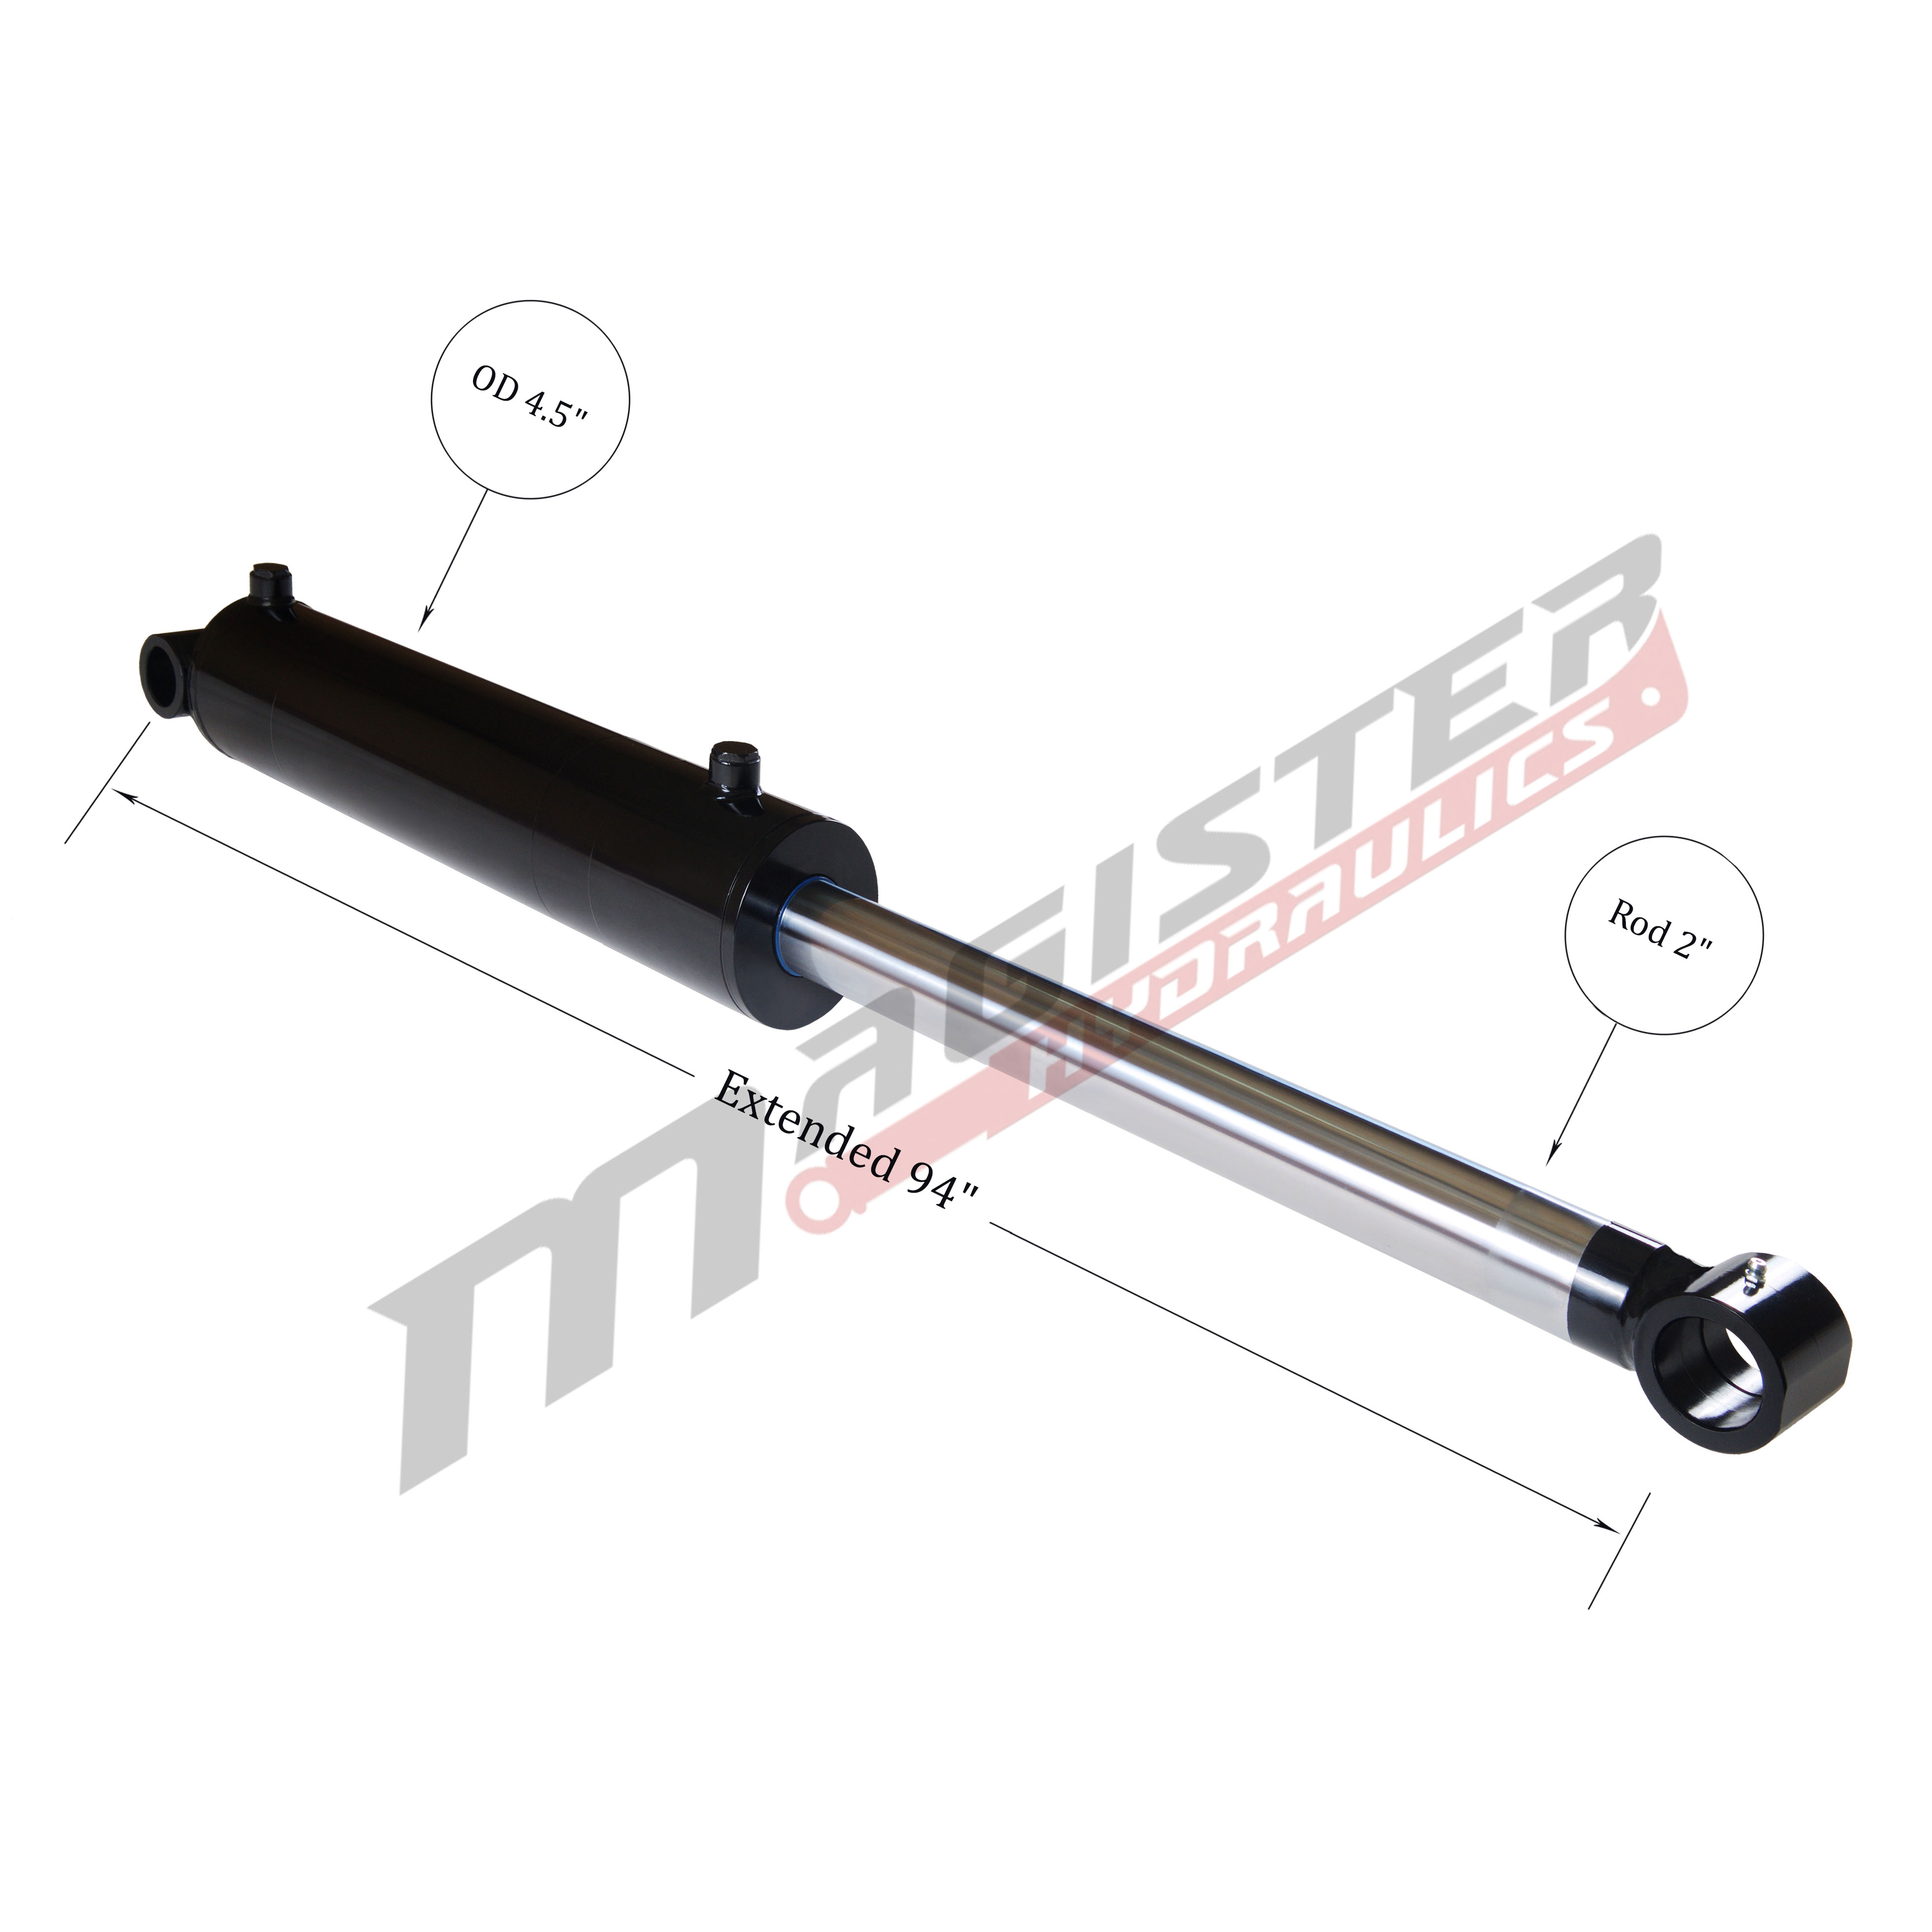 4 bore x 42 stroke hydraulic cylinder, welded cross tube double acting cylinder | Magister Hydraulics